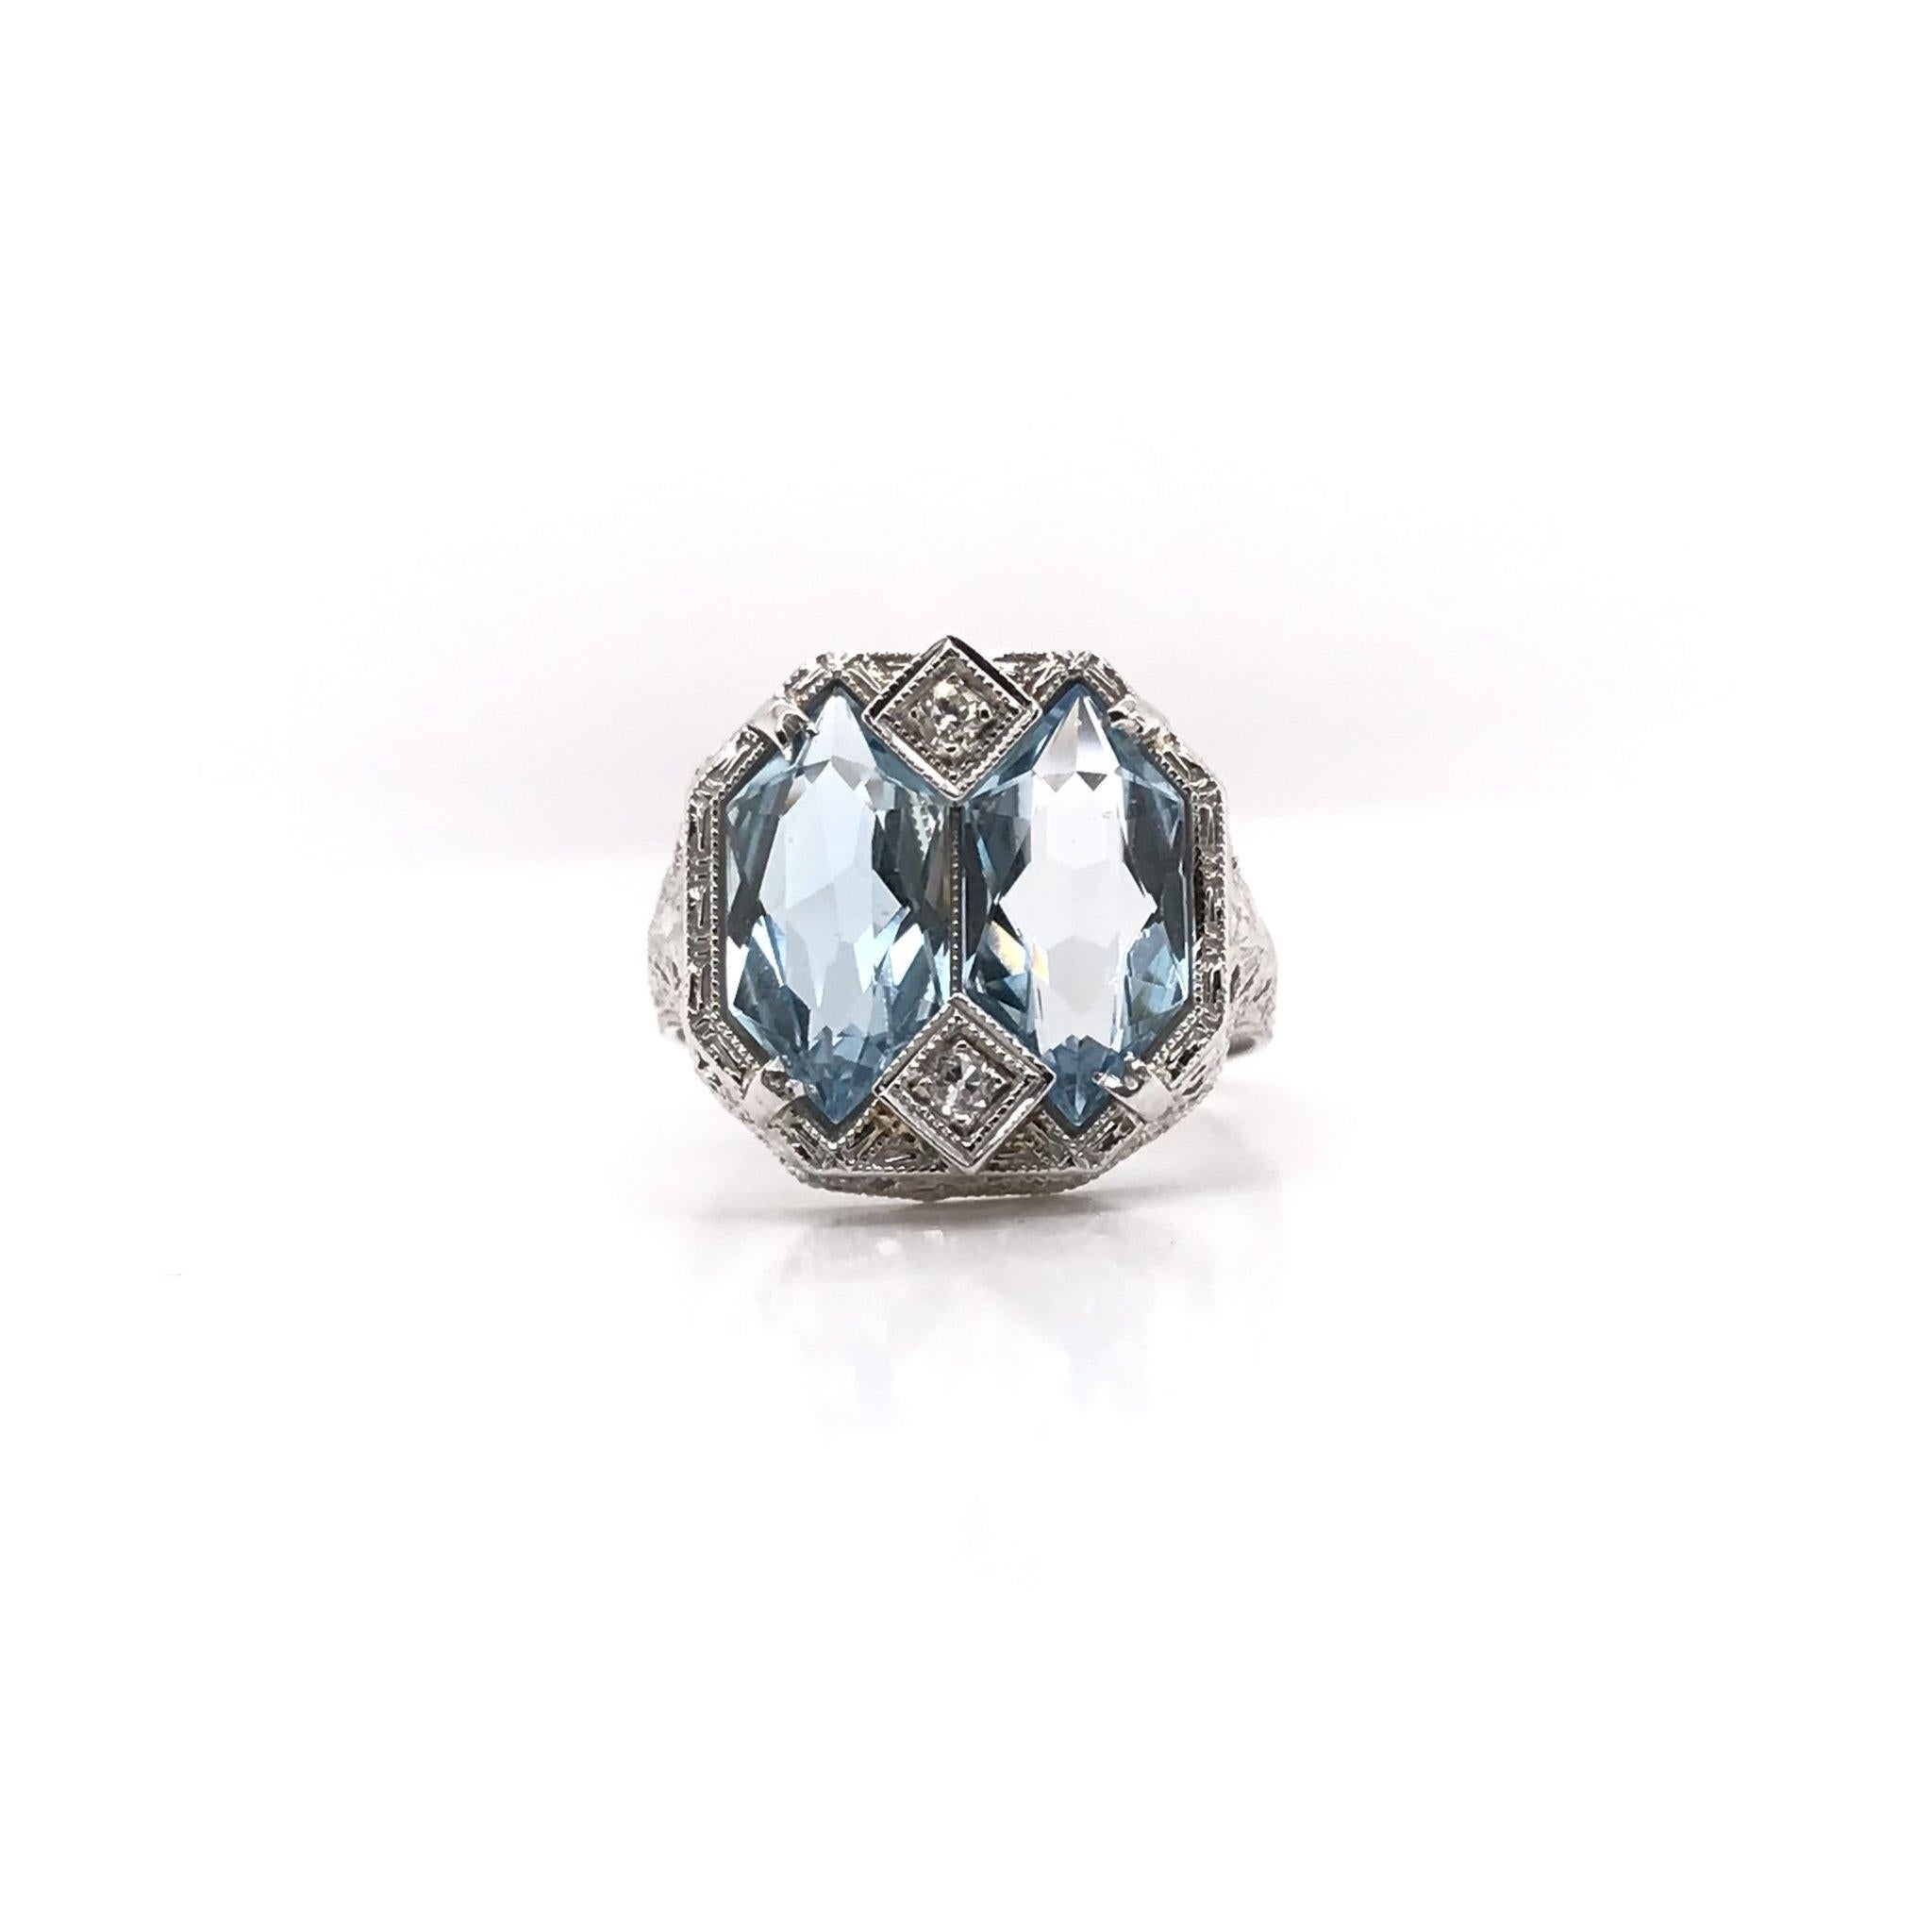 This antique piece was handcrafted sometime during the Art Deco design period ( 1920-1940 ). The filigree setting is 14k white gold and features two custom cut aquamarines. The filigree is arranged in an intricate geometrical motif and features fine